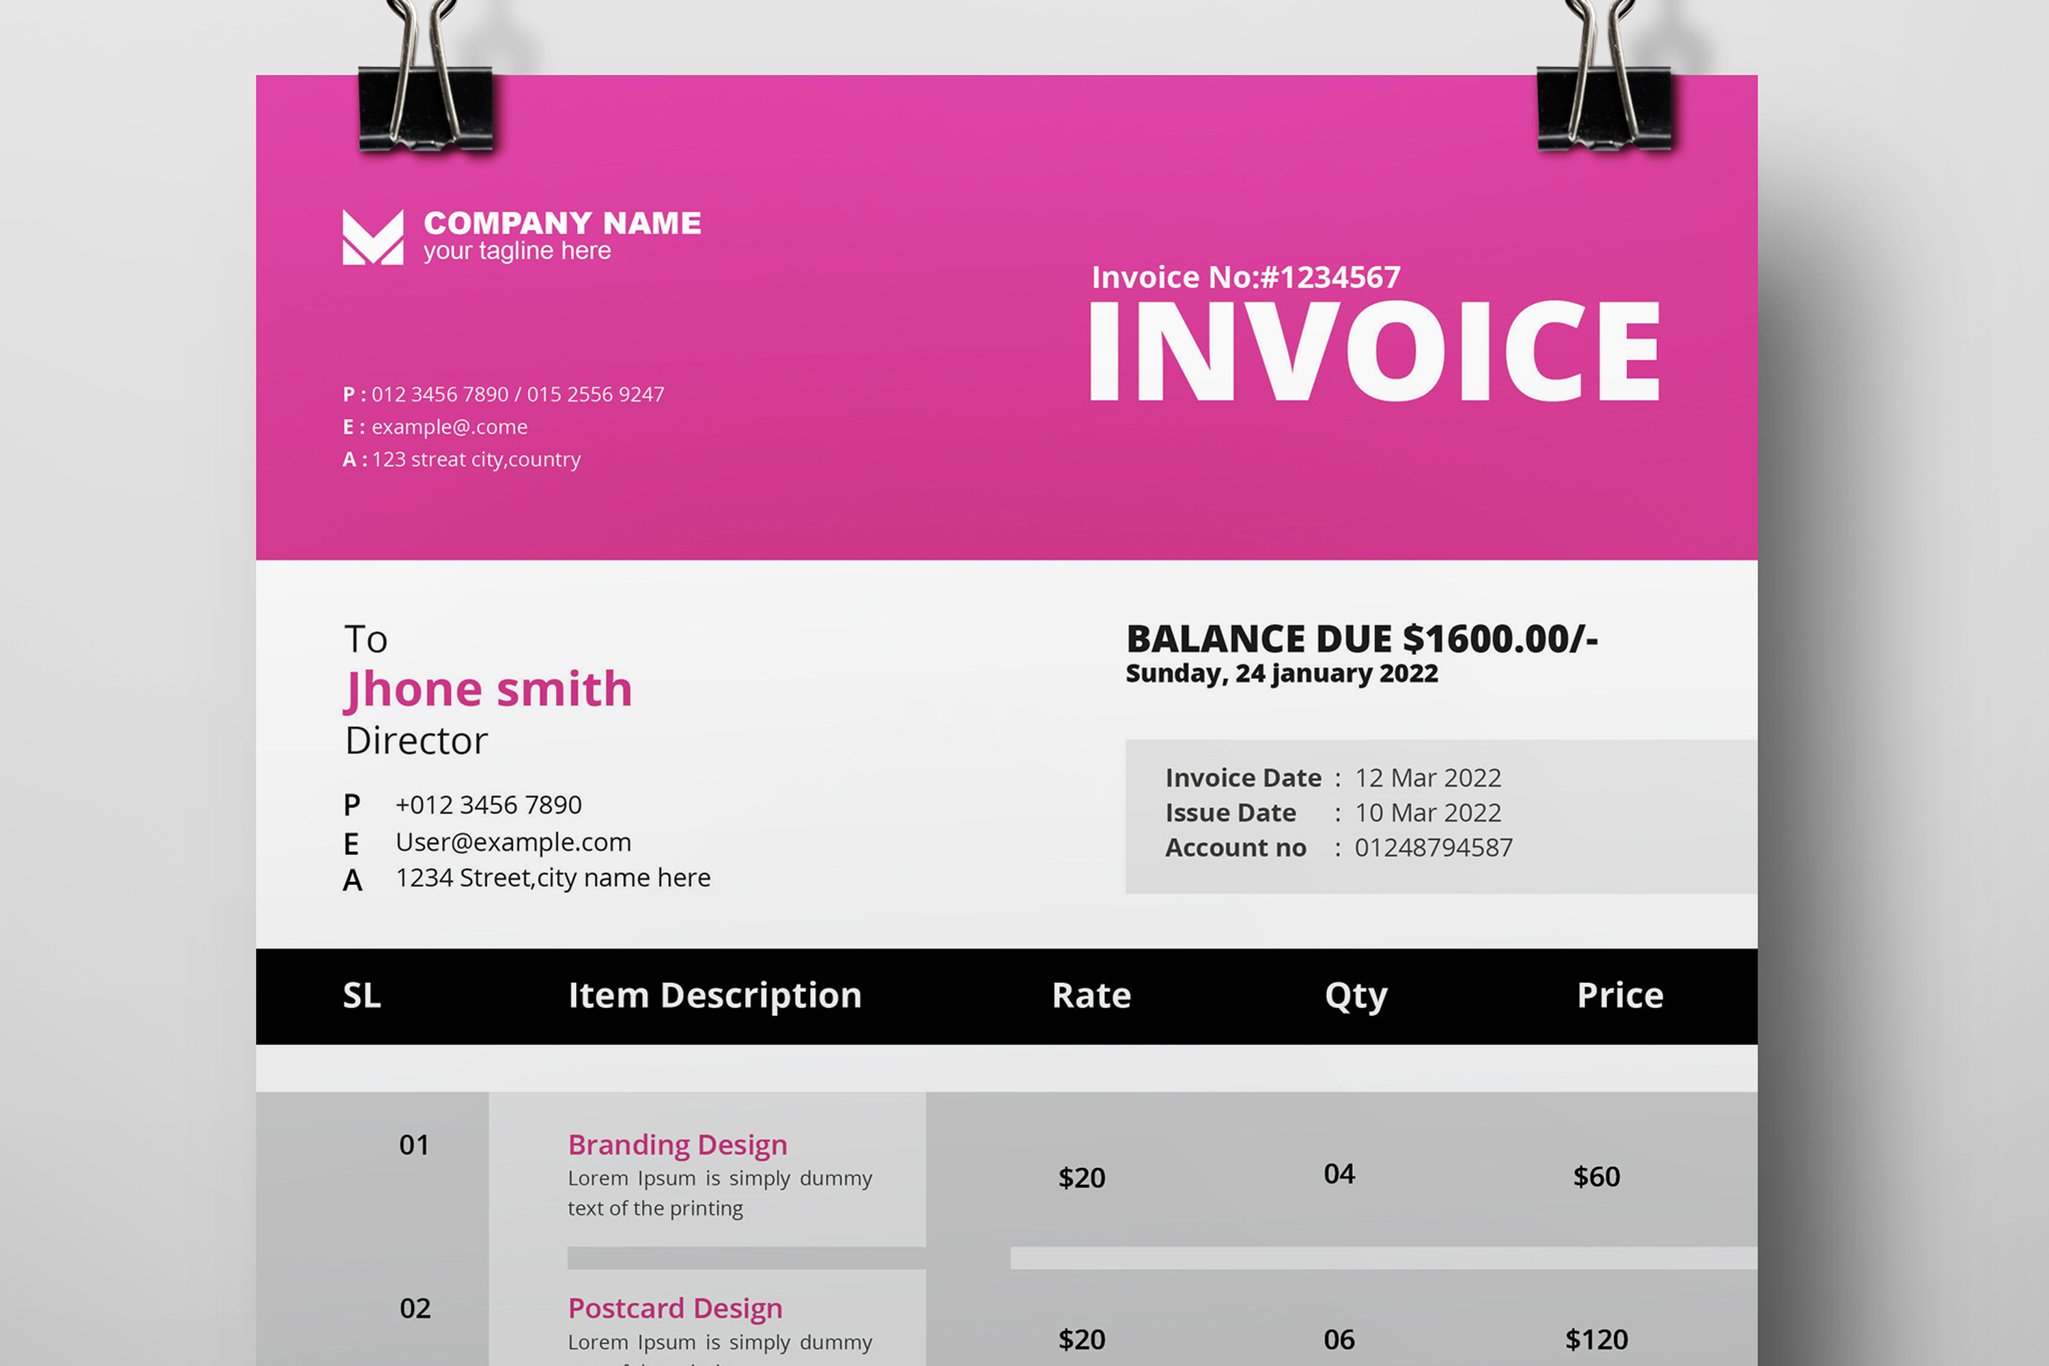 Minimal Invoice Layout preview image.